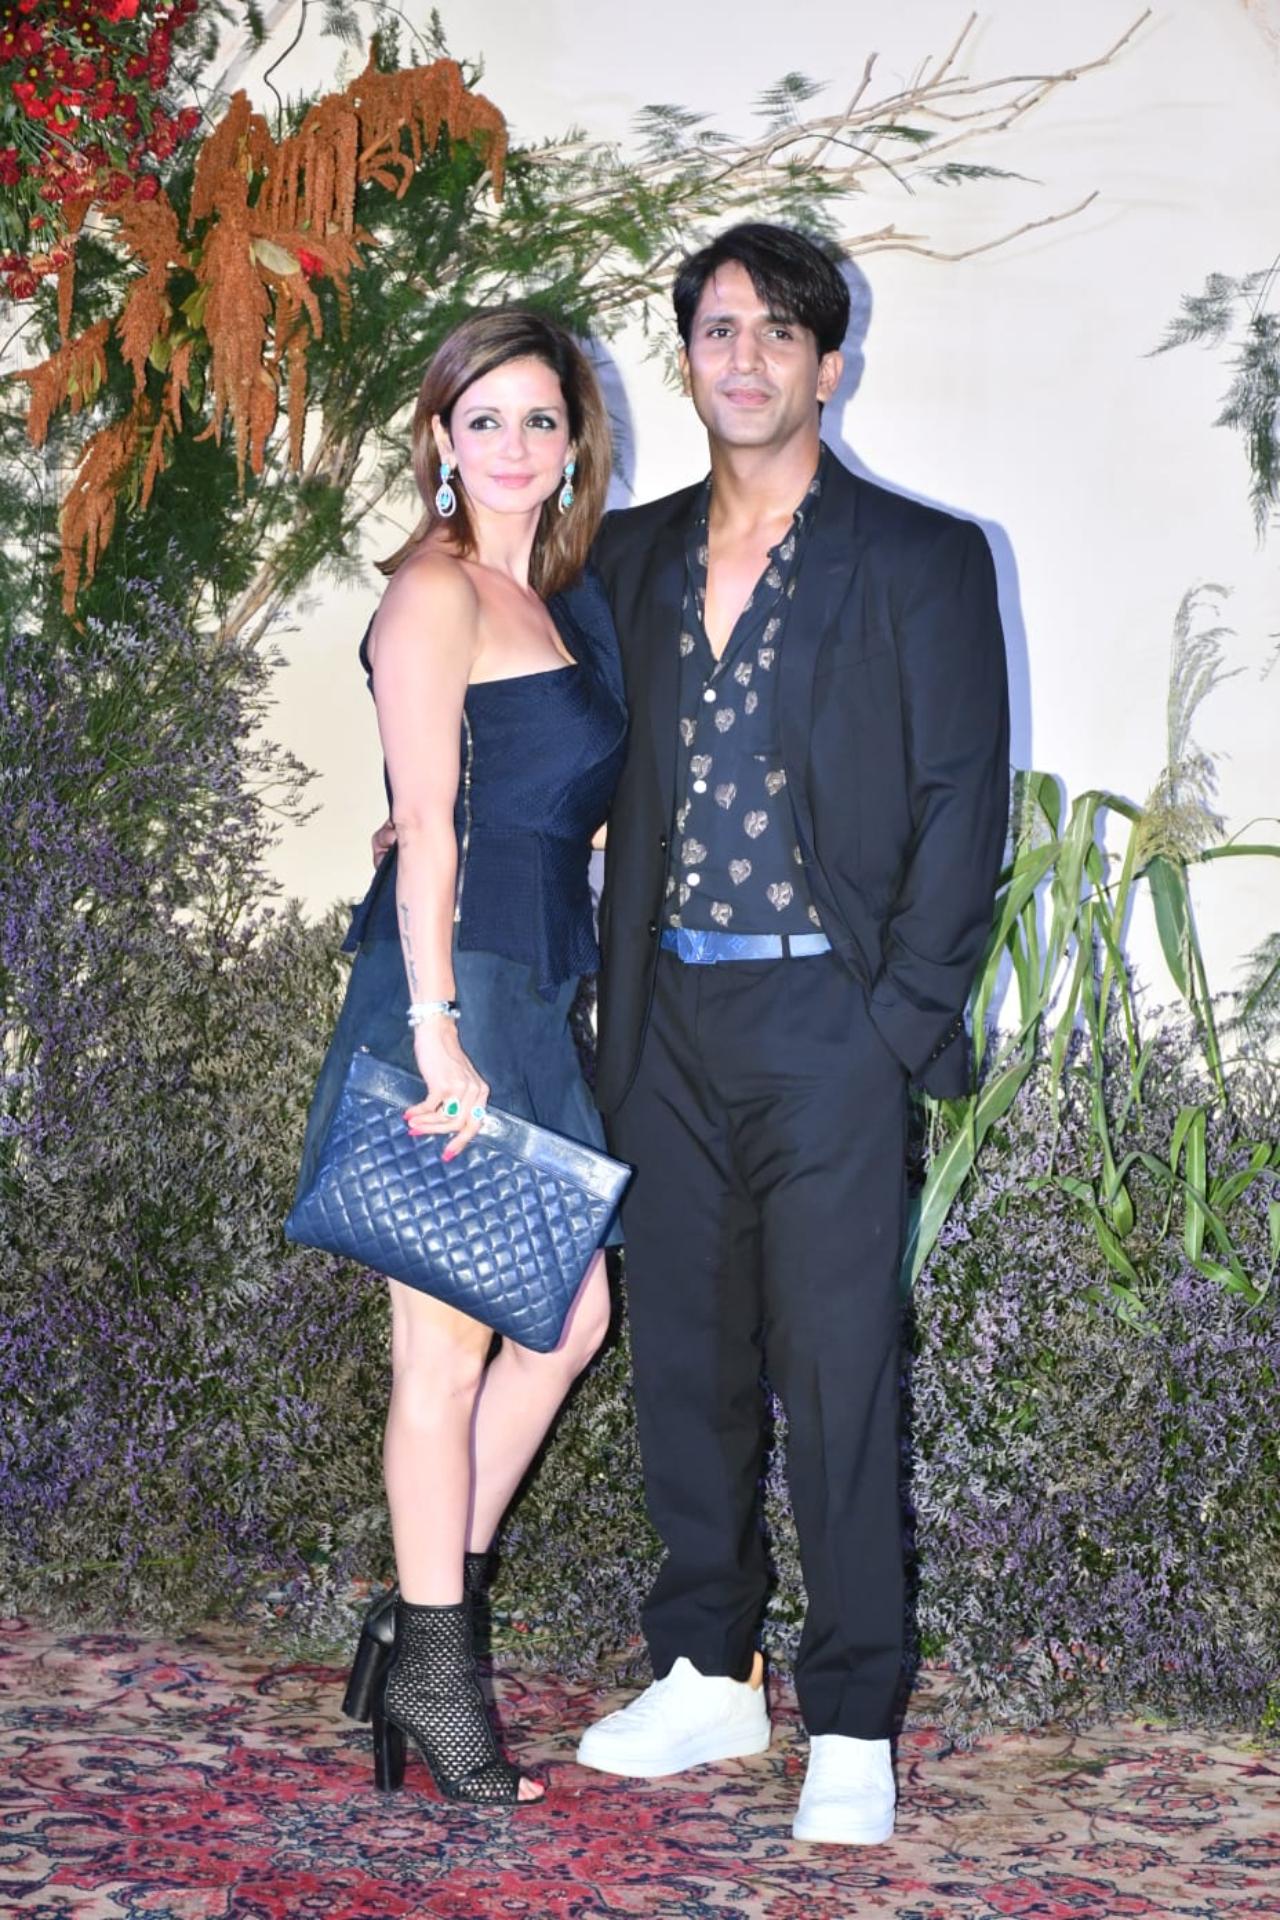 Sussanne Khan was seen posing with Aly Goni for the paparazzi before the two headed in